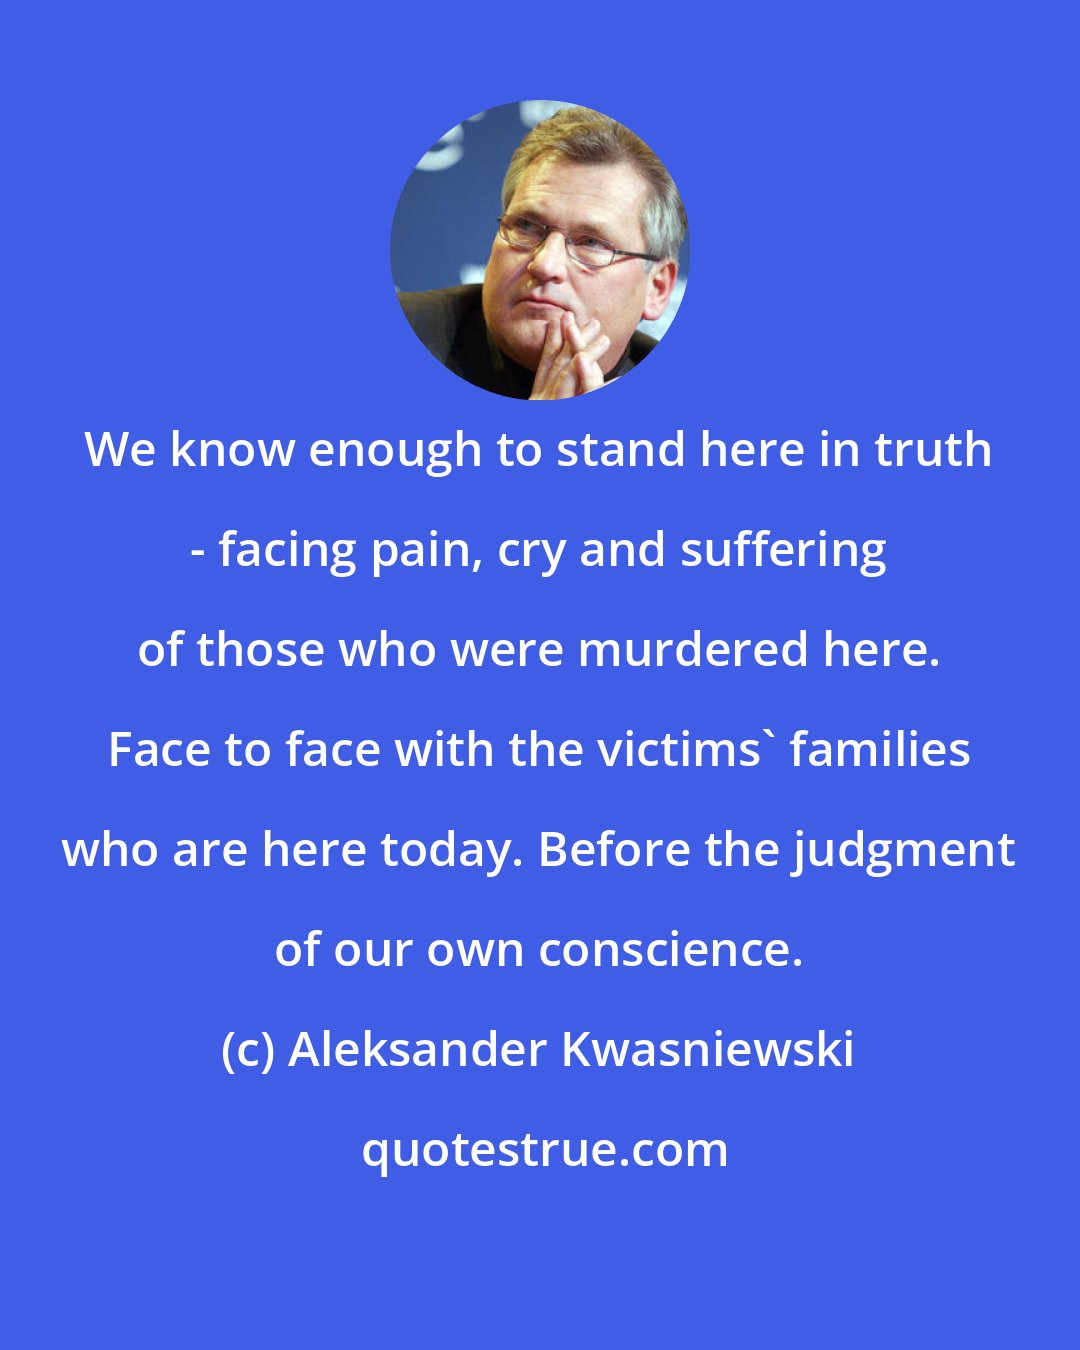 Aleksander Kwasniewski: We know enough to stand here in truth - facing pain, cry and suffering of those who were murdered here. Face to face with the victims' families who are here today. Before the judgment of our own conscience.